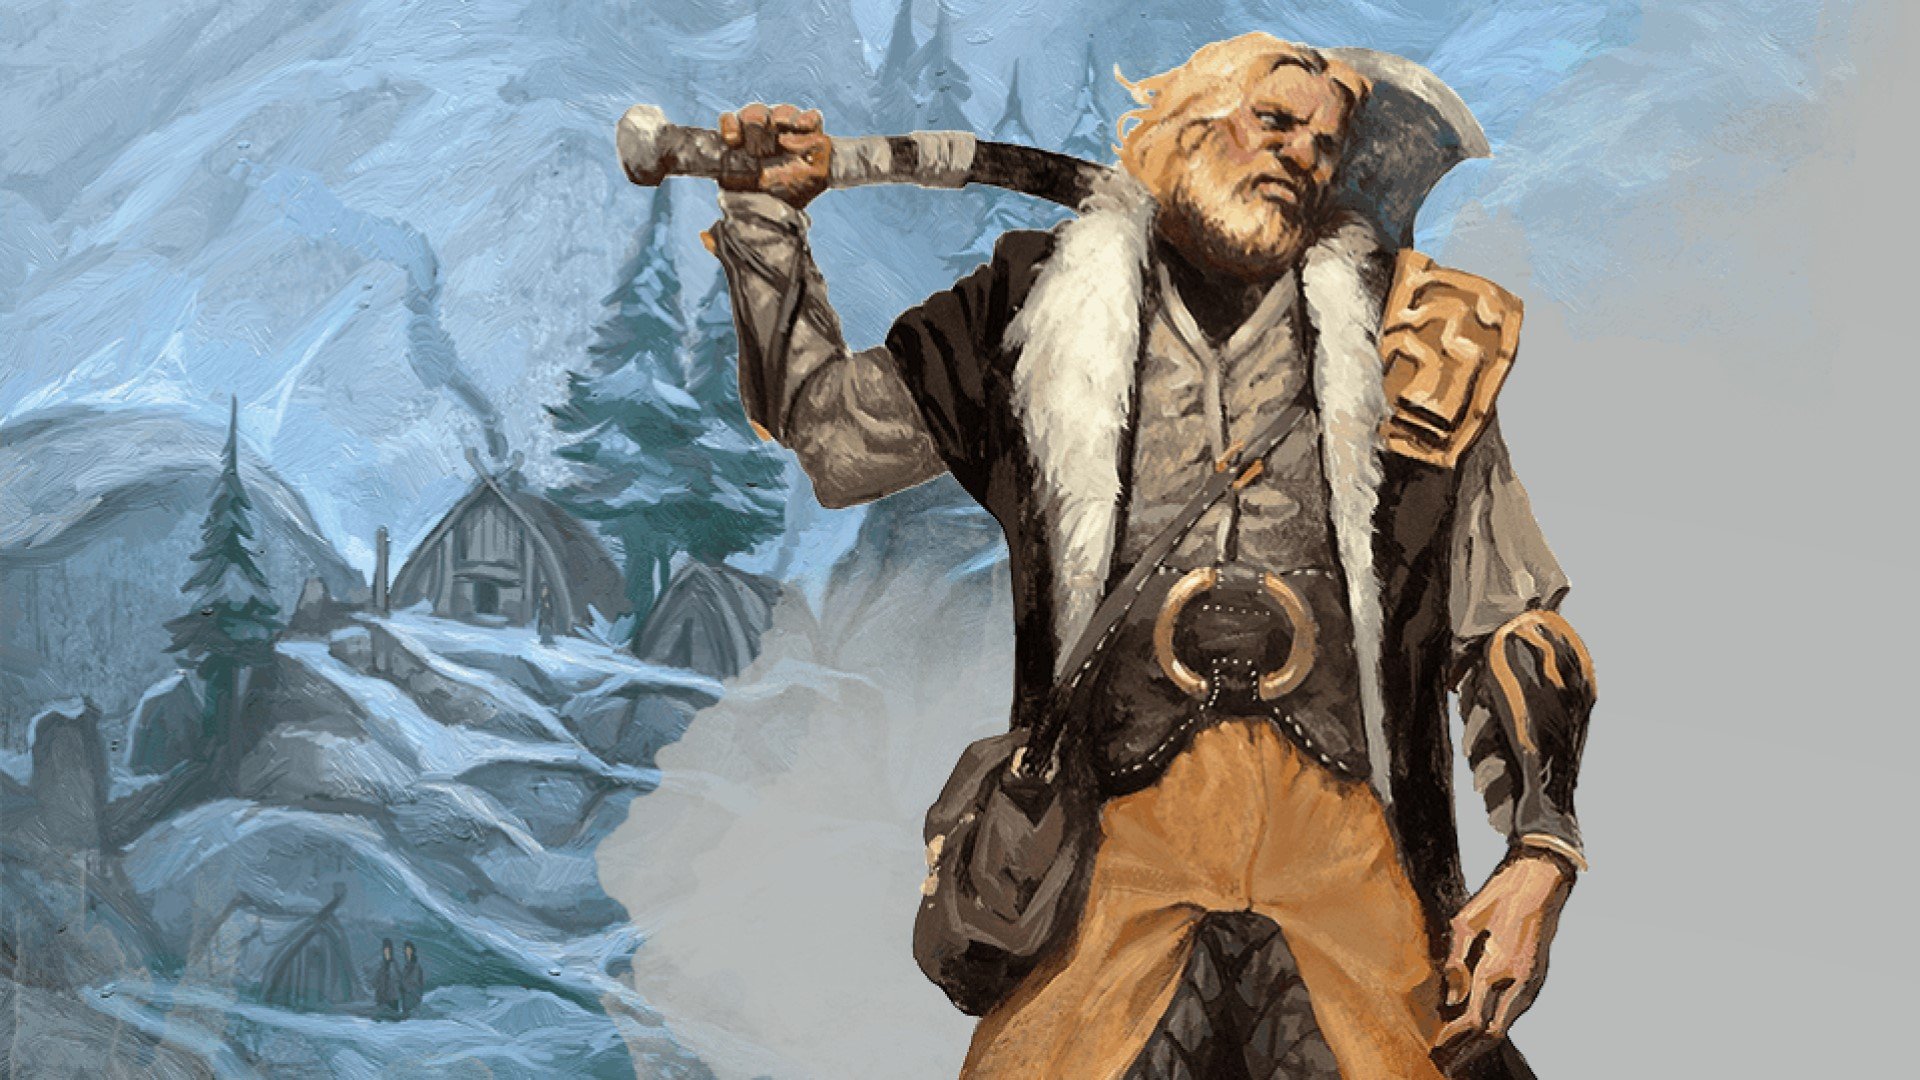 DnD Barbarian 5E class guide - Wizards of the Coast artwork showing a human barbarian with a wood axe